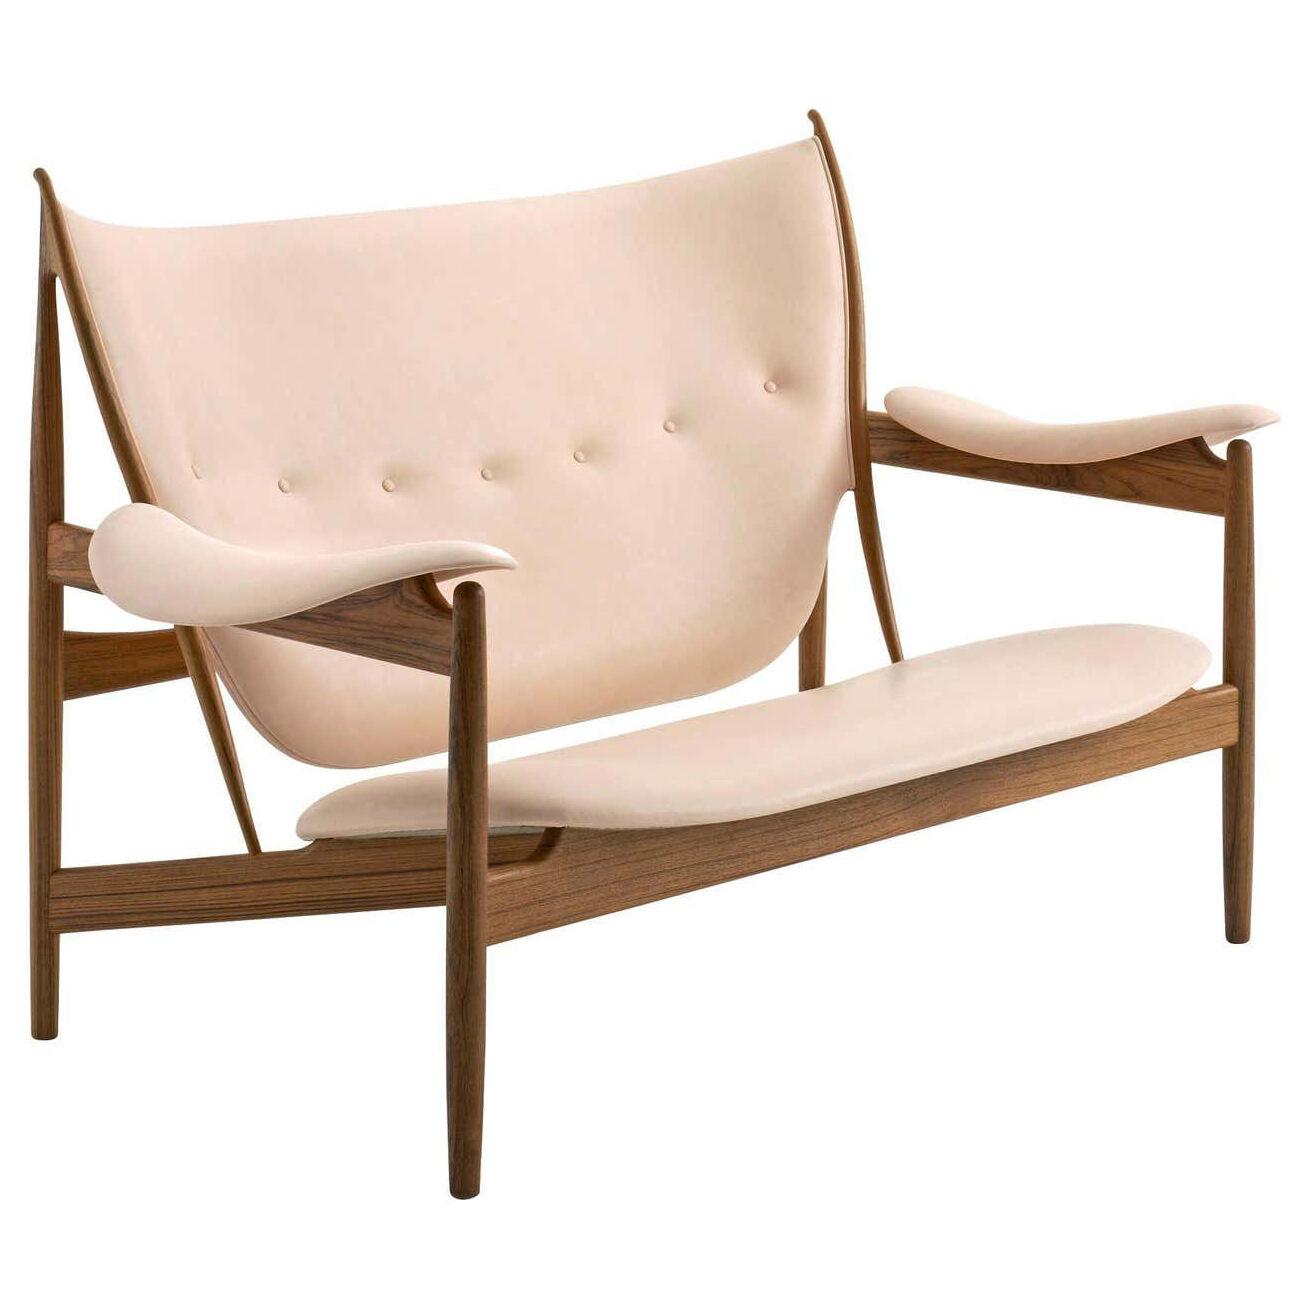 Finn Juhl Chieftain Sofa Couch Wood and Leather